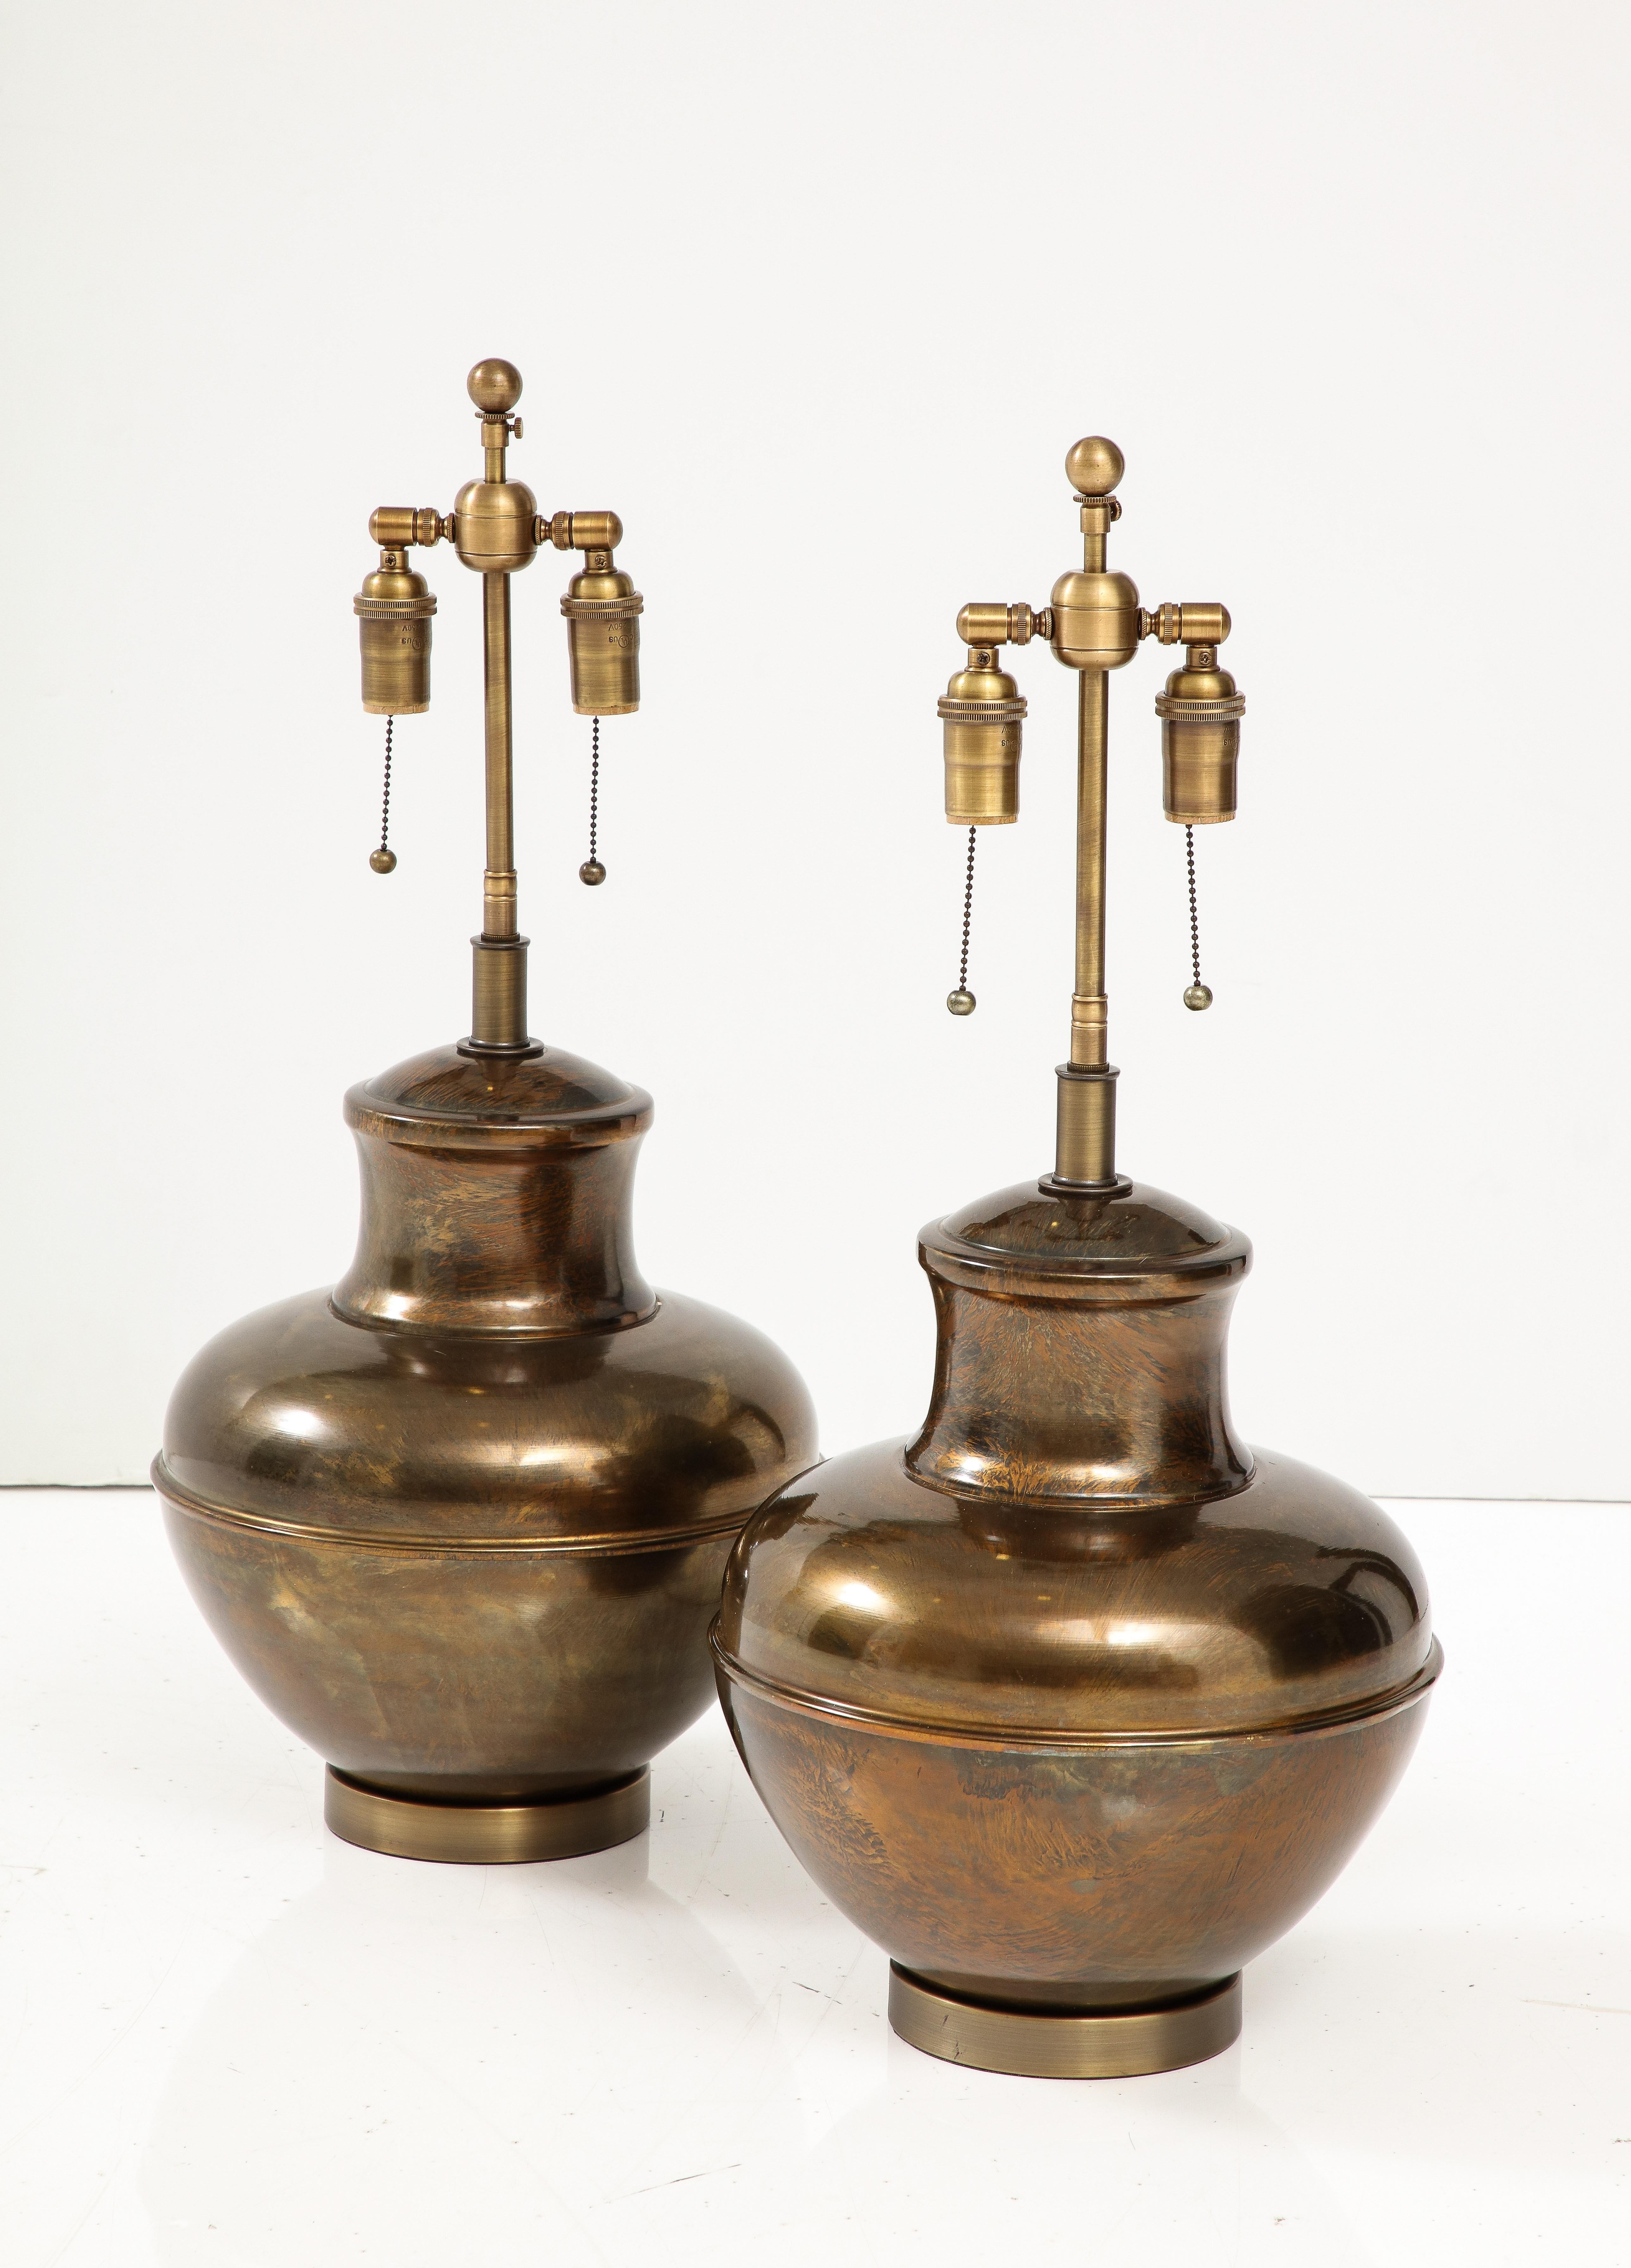 Pair of Mid-Century Brass Urn shaped lamps.
The lamps have been Newly rewired with adjustable Antique Brass finished 
double clusters that take standard size light bulbs and silk rayon cords.
Each socket can take up to  60 Watts / 120 Watts maximum